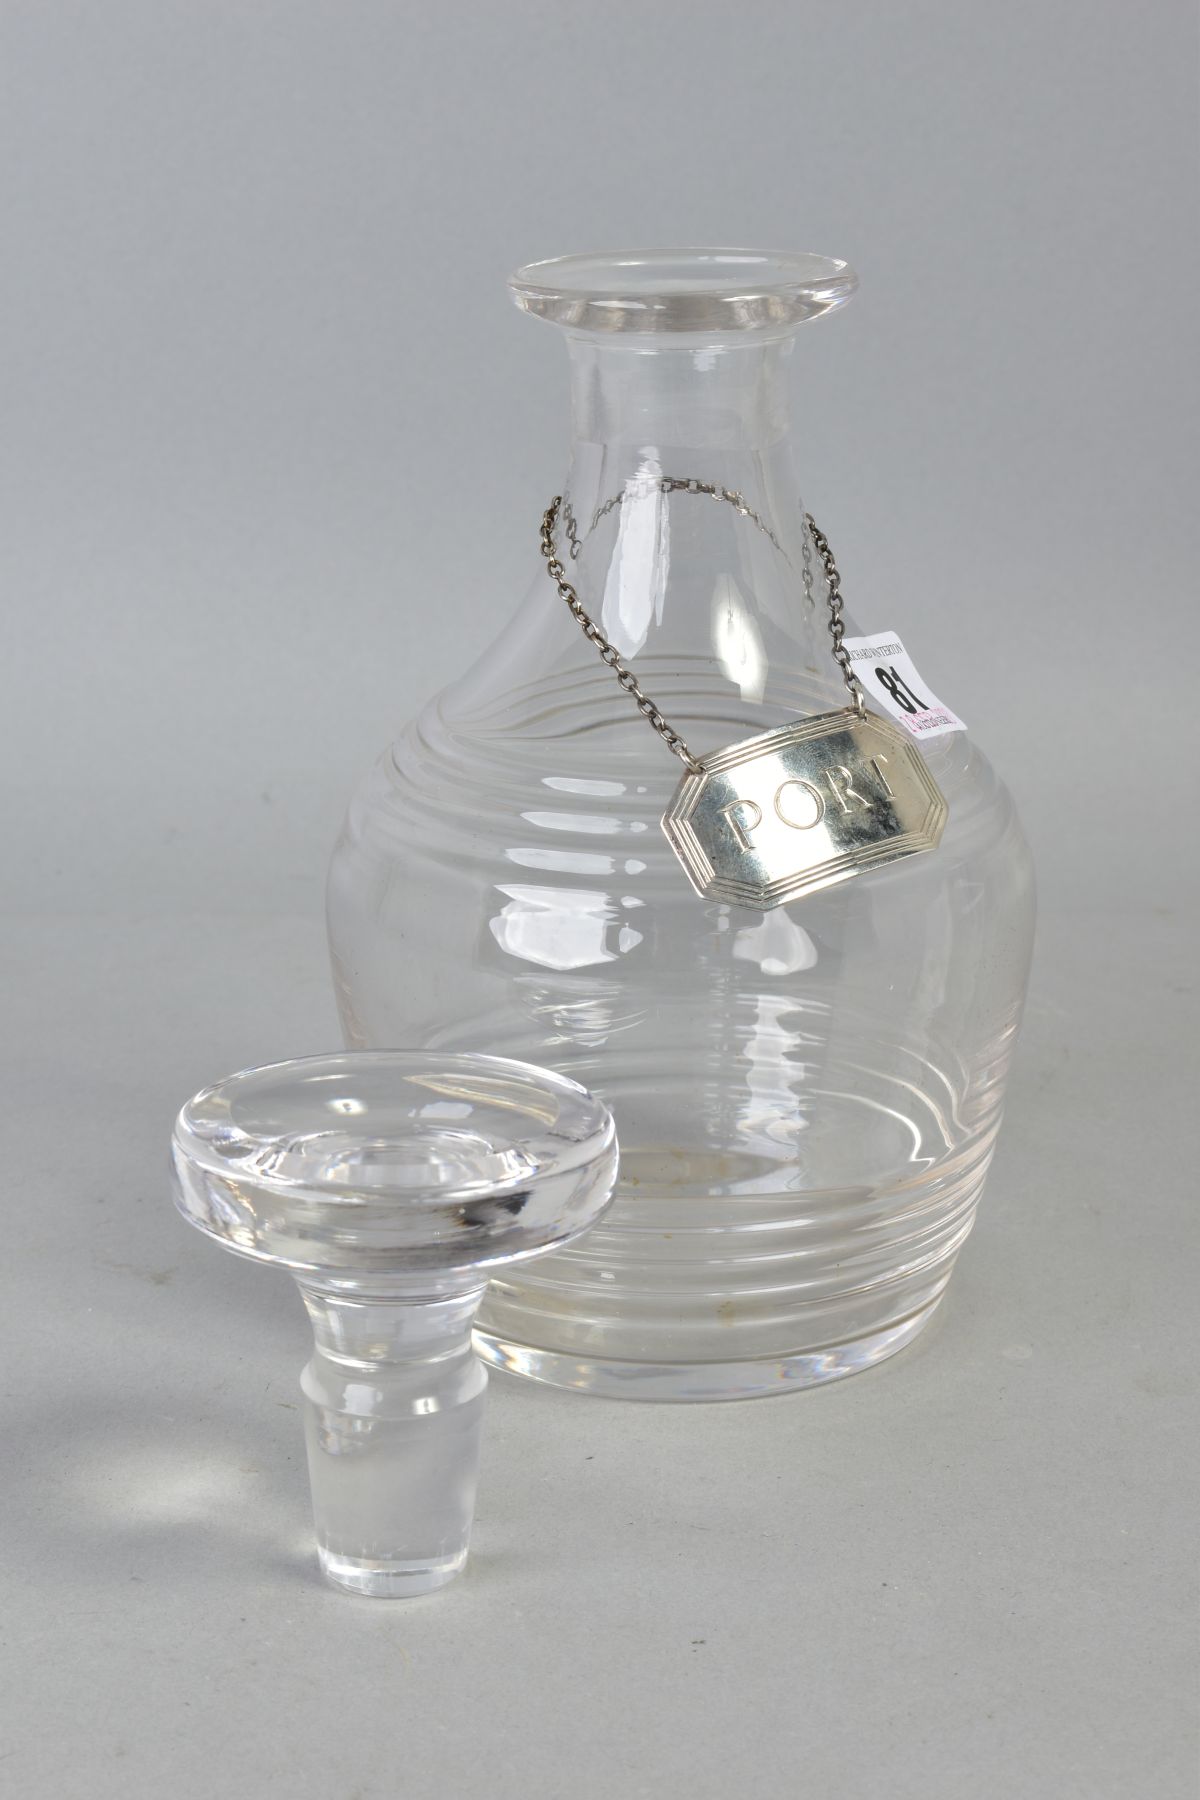 A GLASS DECANTER AND SILVER LABEL, glass decanter with stopper, height approximately 22cm, - Image 2 of 3